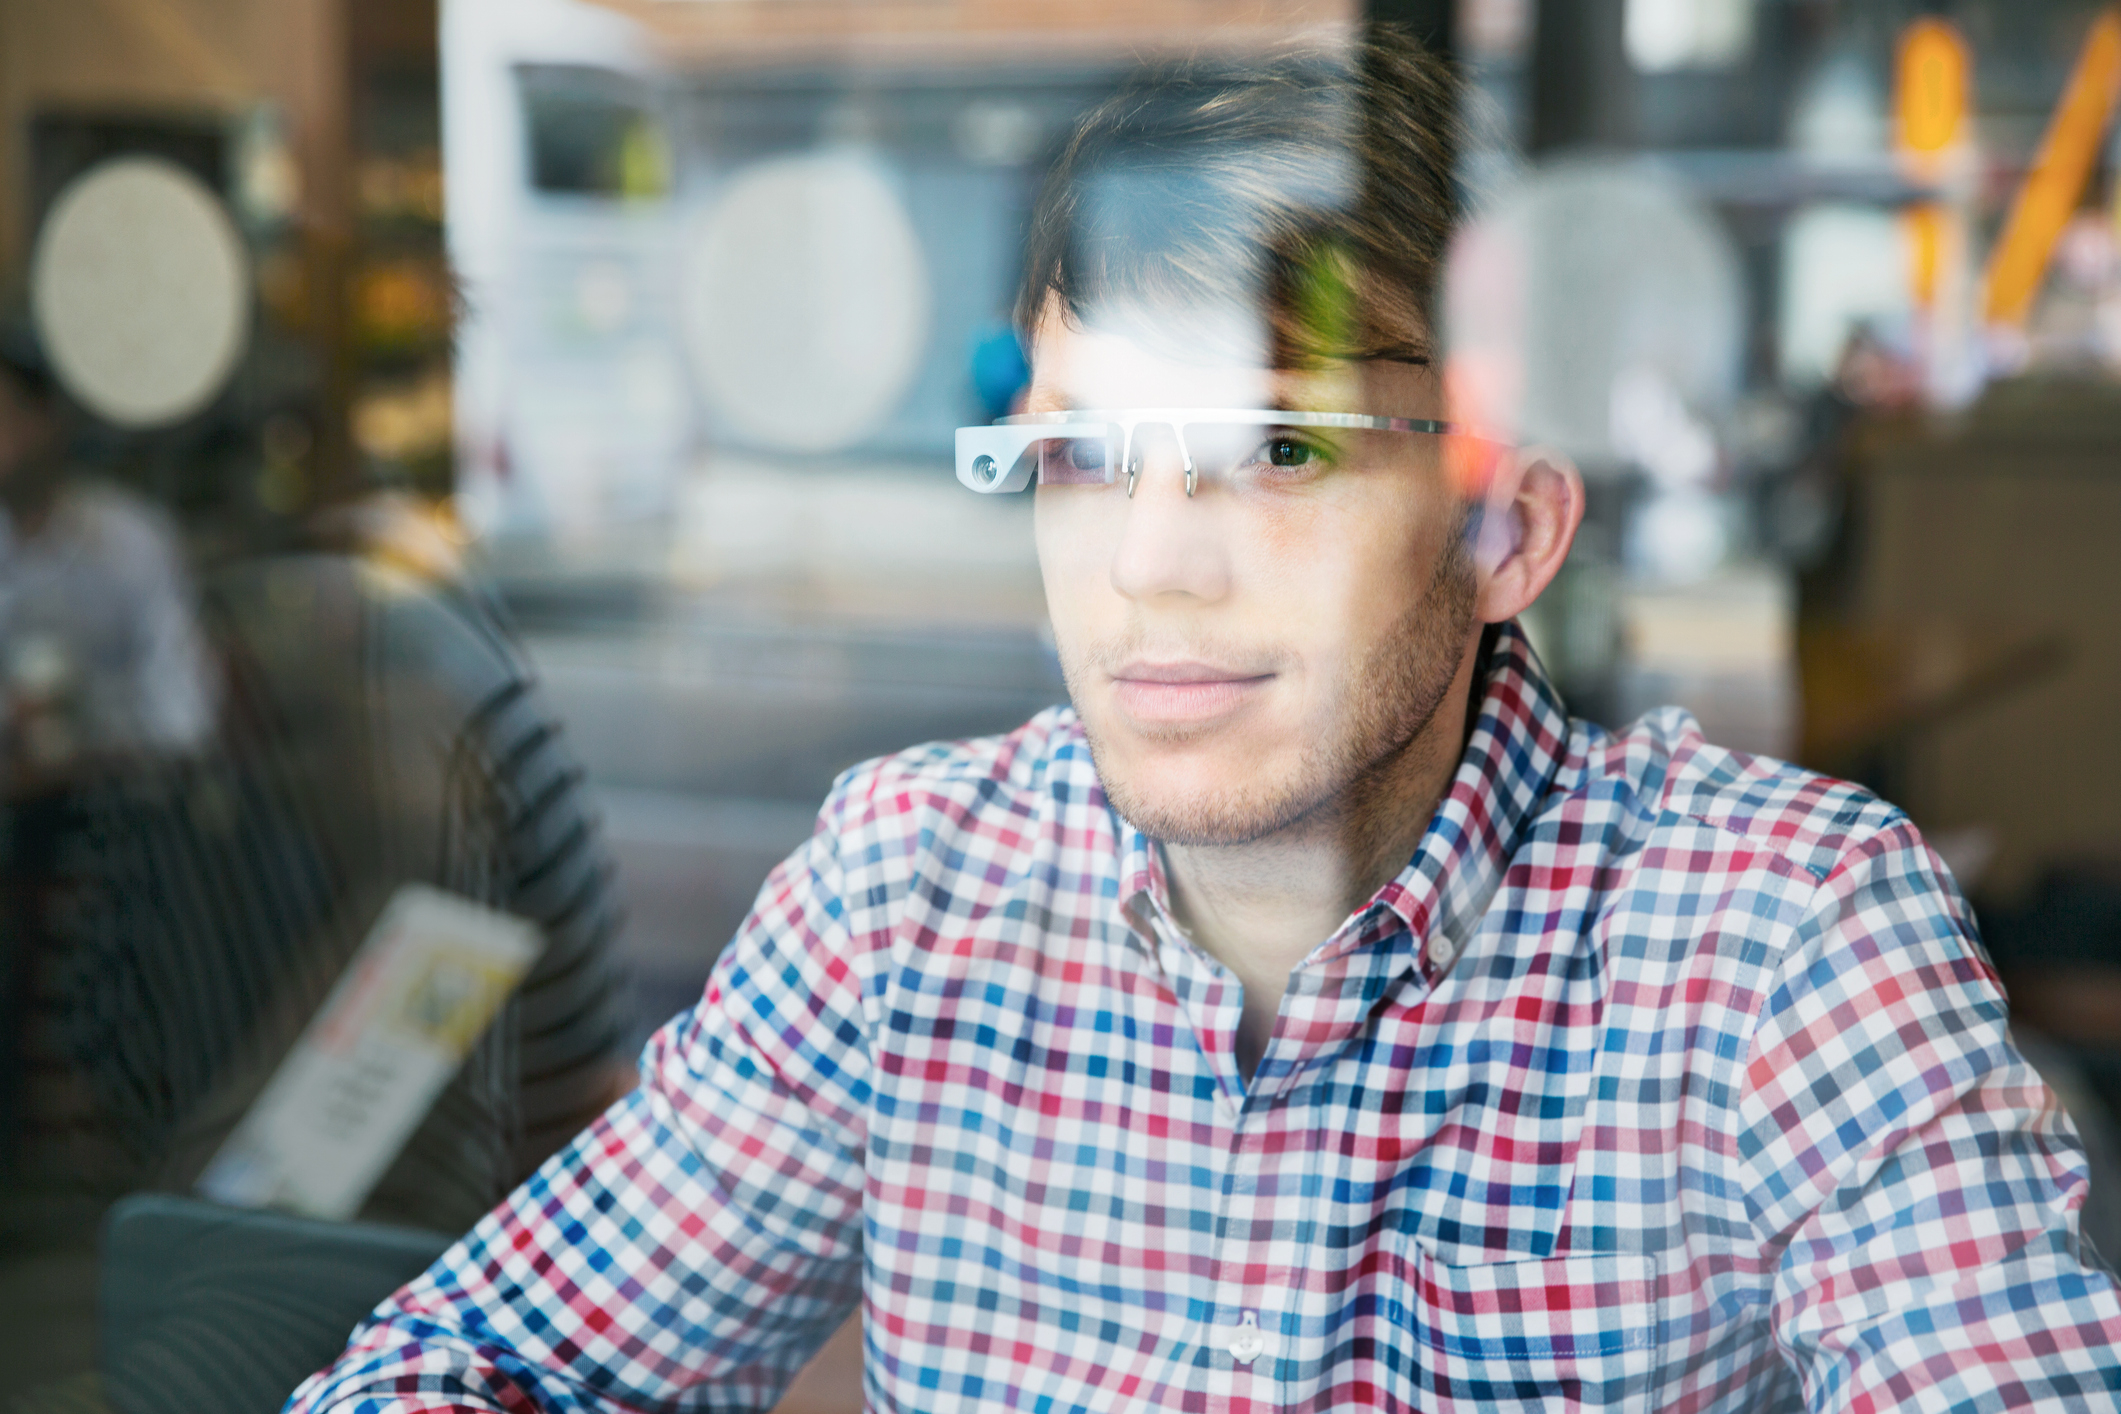 Person in a plaid shirt wearing smart glasses, looking through a window with reflections